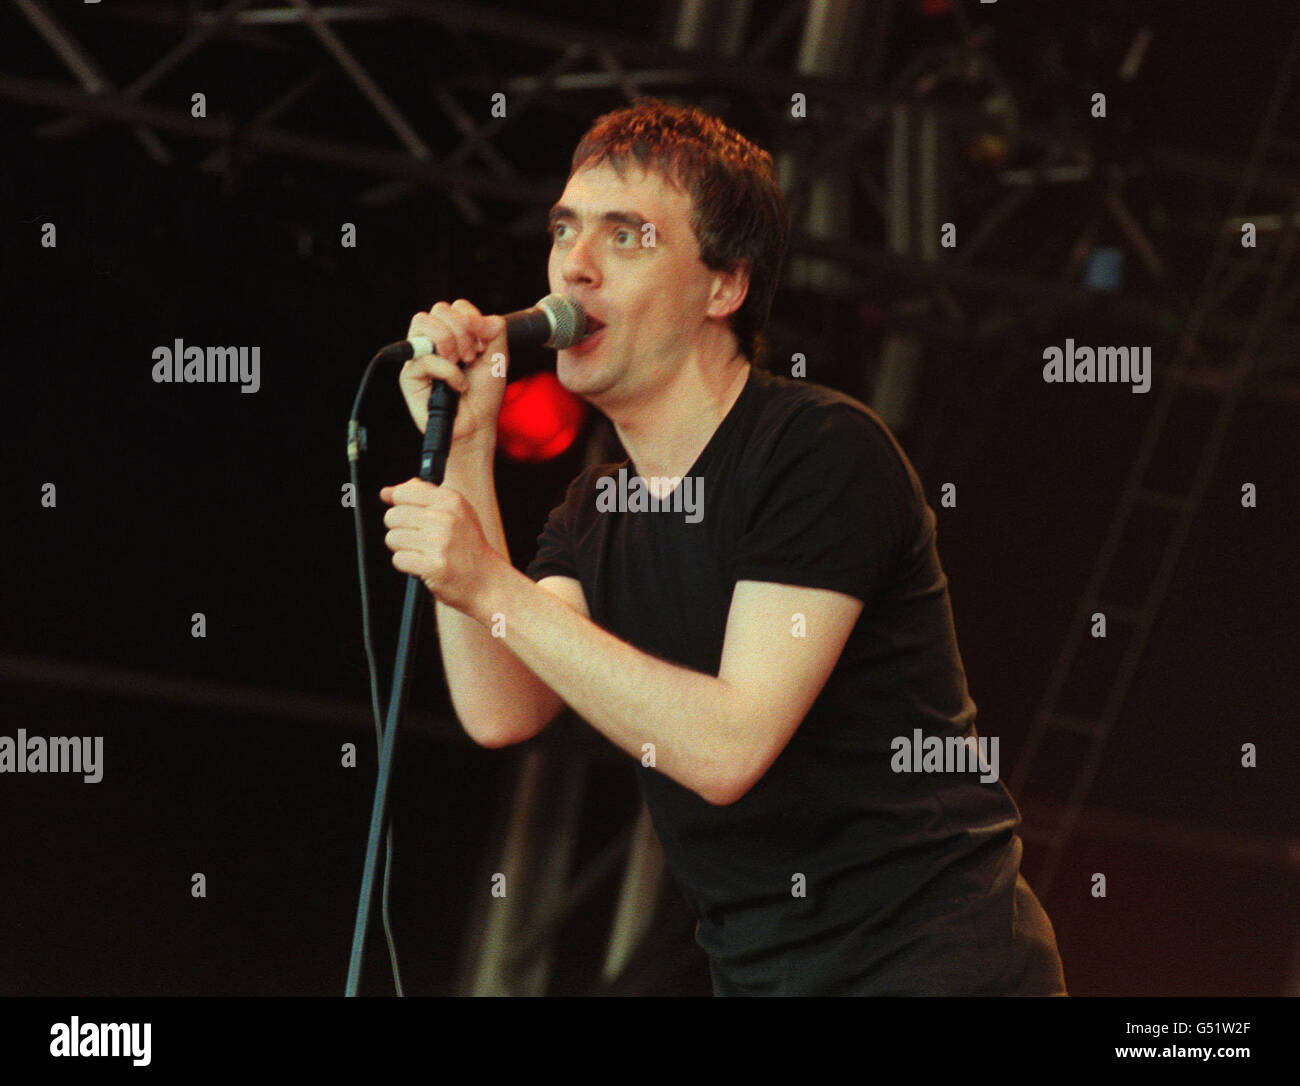 Singer Paul McCloone, of the Irish pop-punk band The Undertones, performing on stage at The Fleadh music festival in Finsbury Park, central London, on Saturday 10 June 2000. Stock Photo